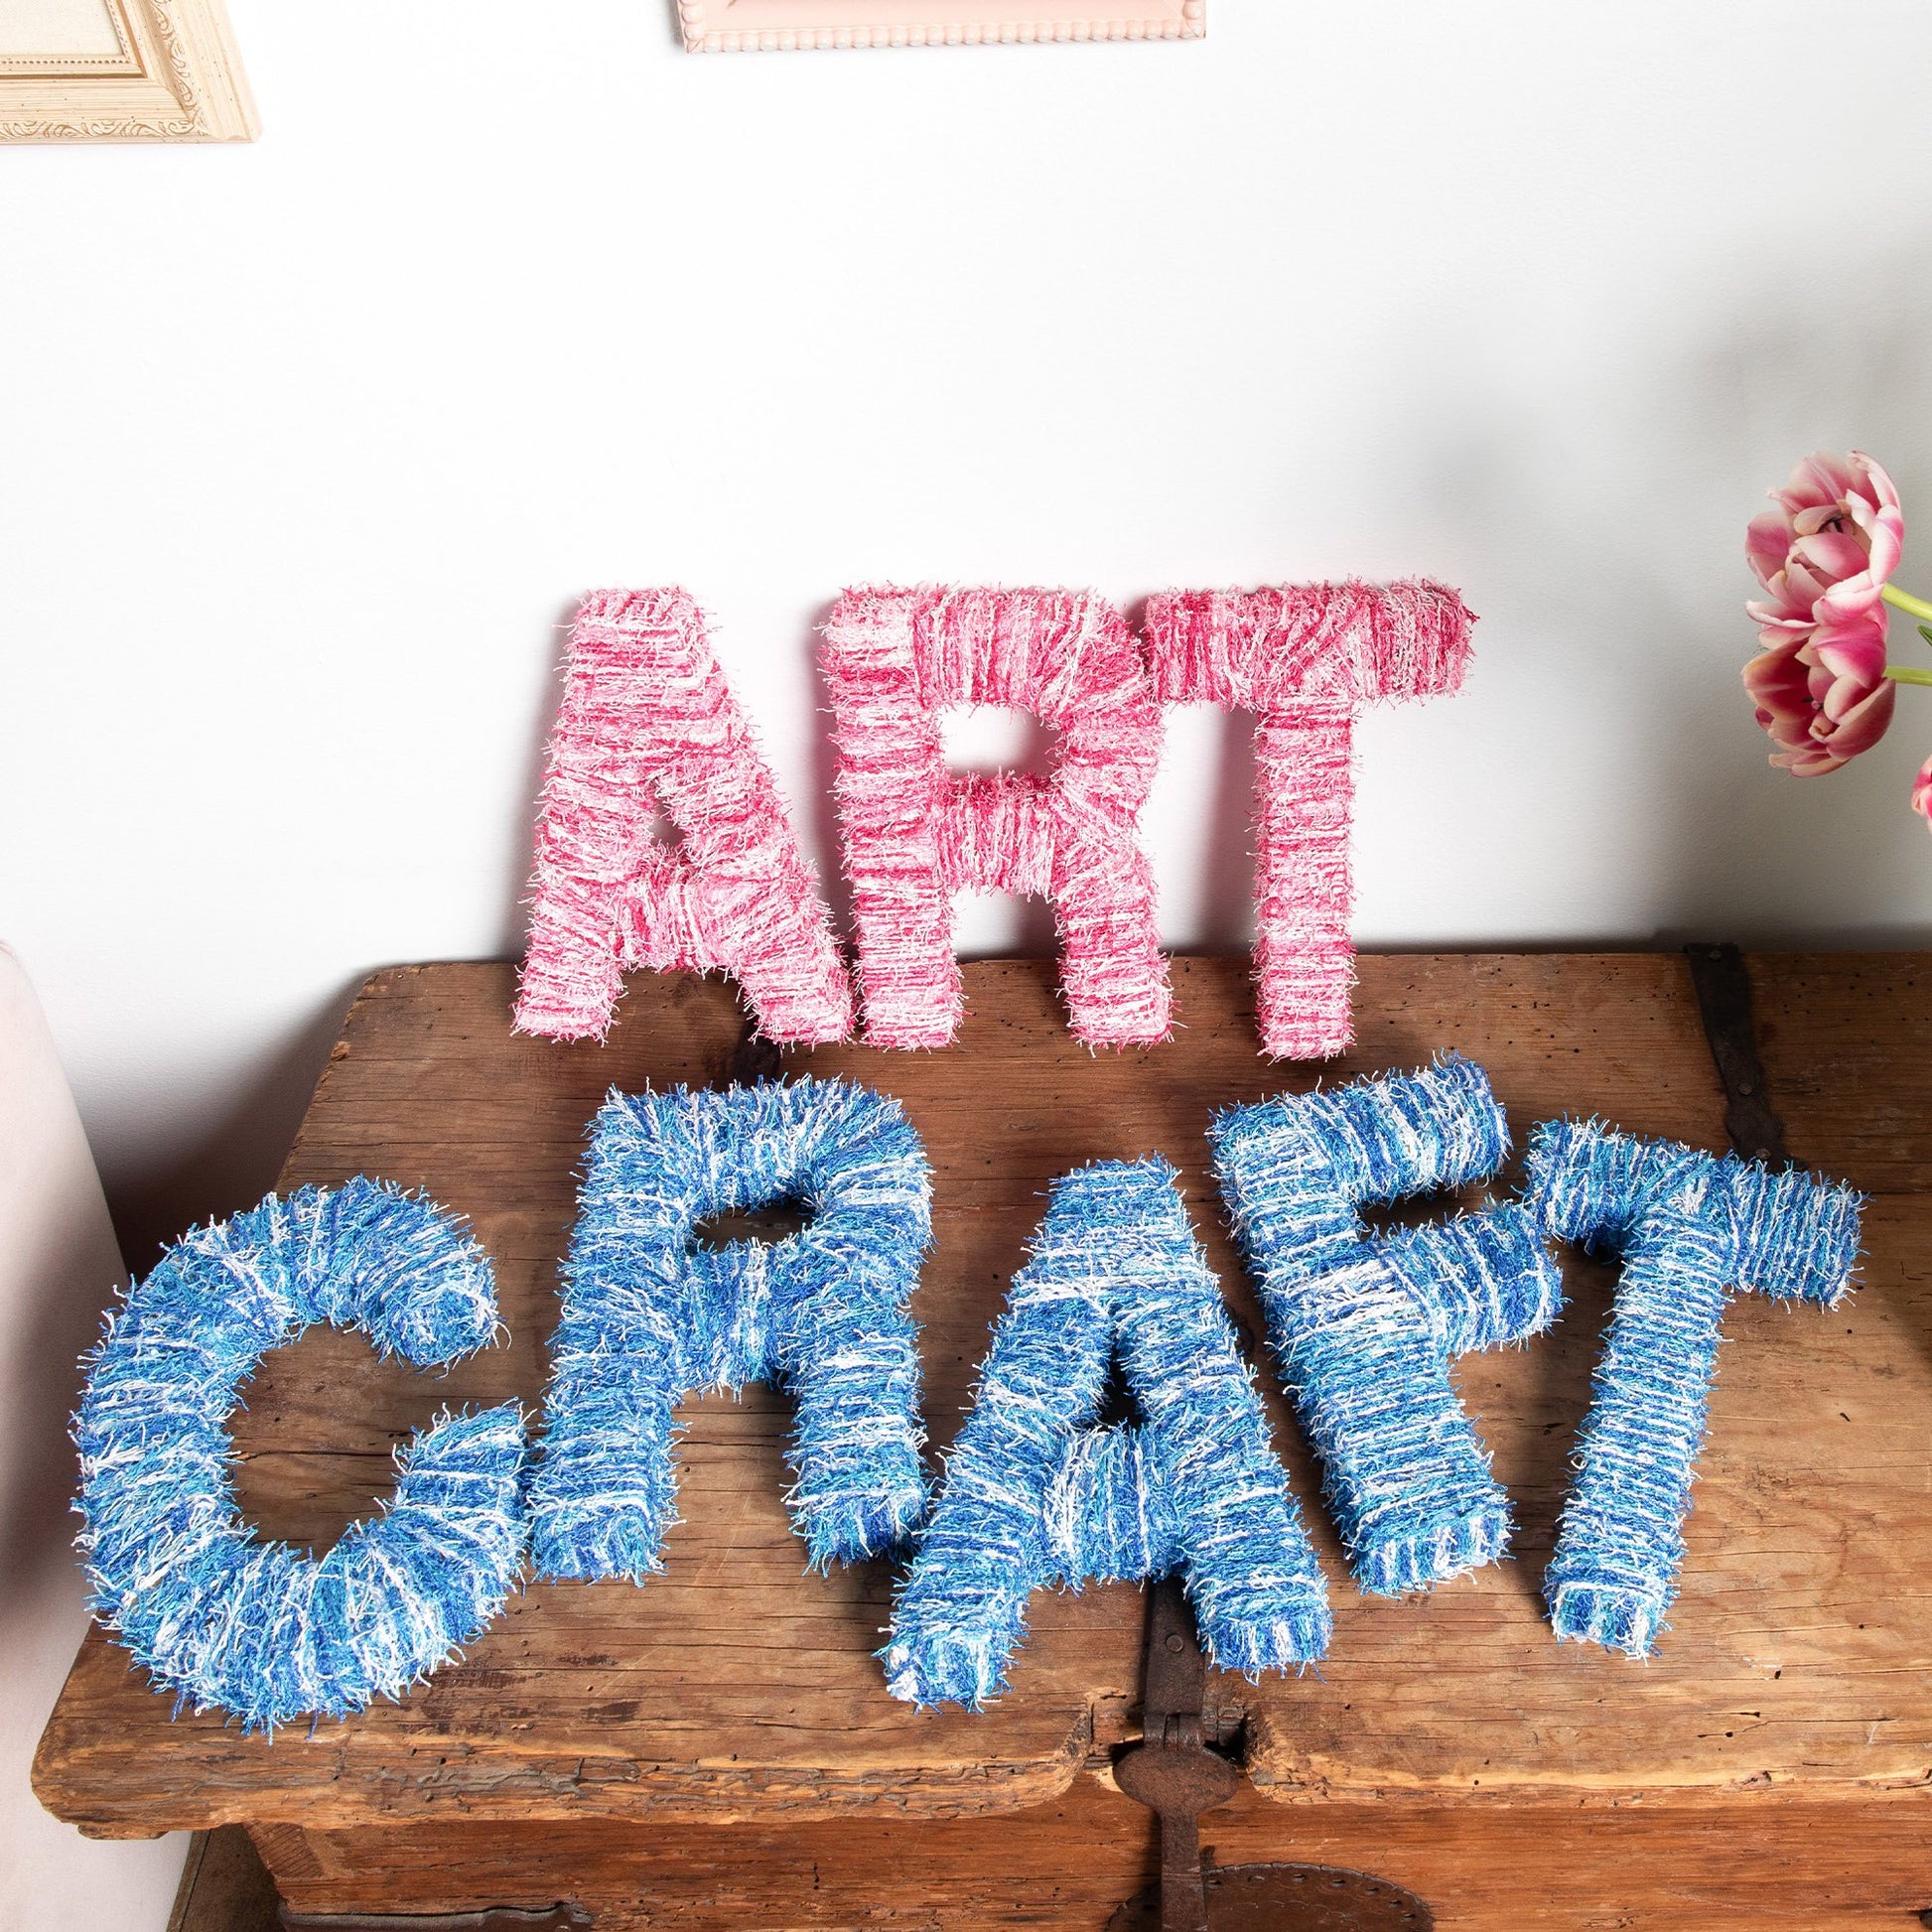 Free Red Heart Arts & Crafts Yarn Wrapped Letters Pattern